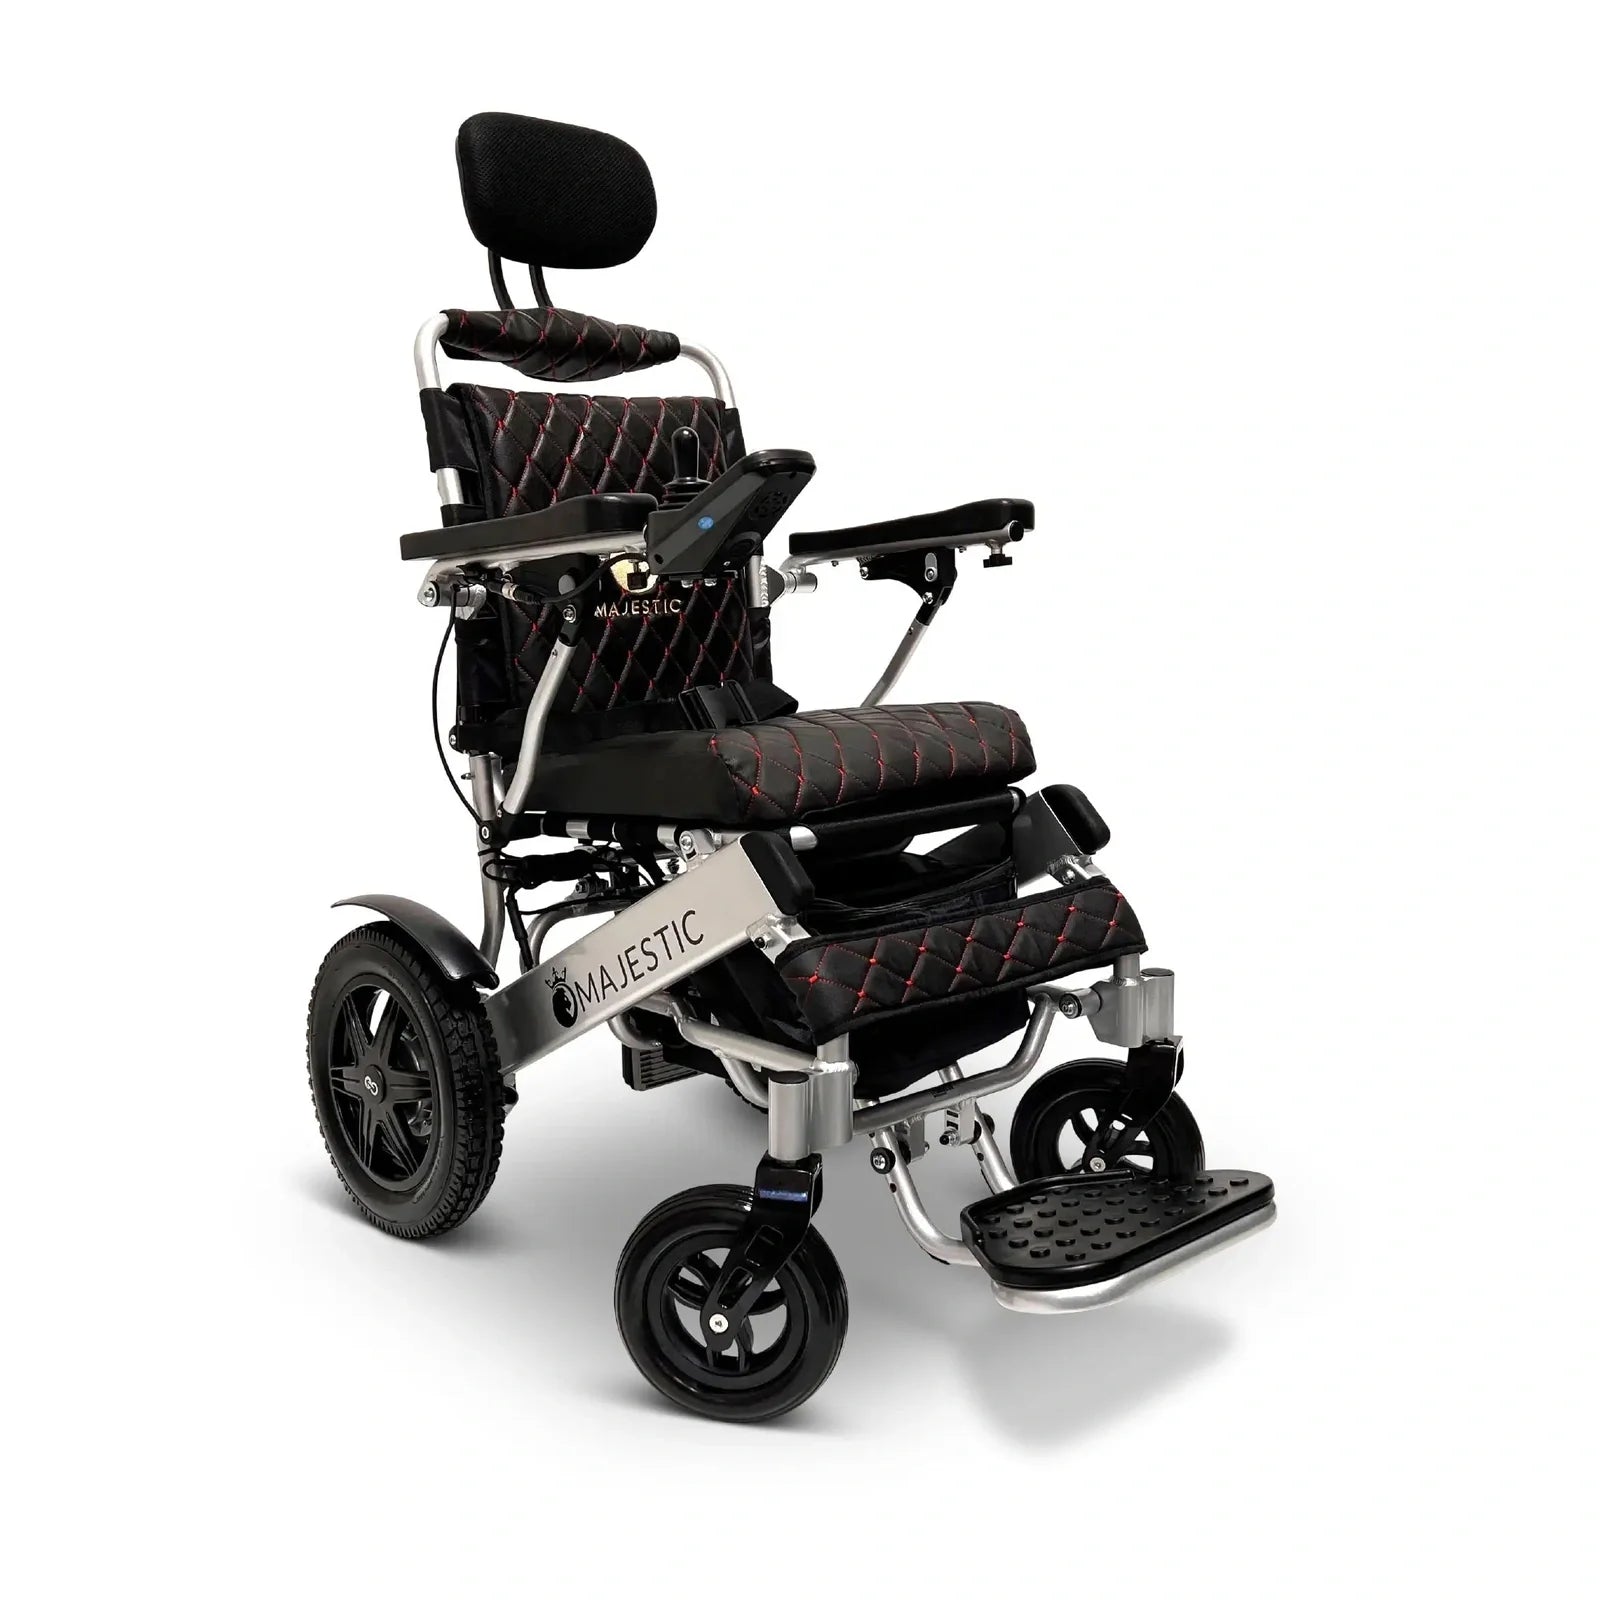 ComfyGO Majestic IQ-9000 Long Range Remote Controlled Folding Reclining Electric Wheelchair Power Wheelchairs ComfyGO Silver Black Auto Reclining